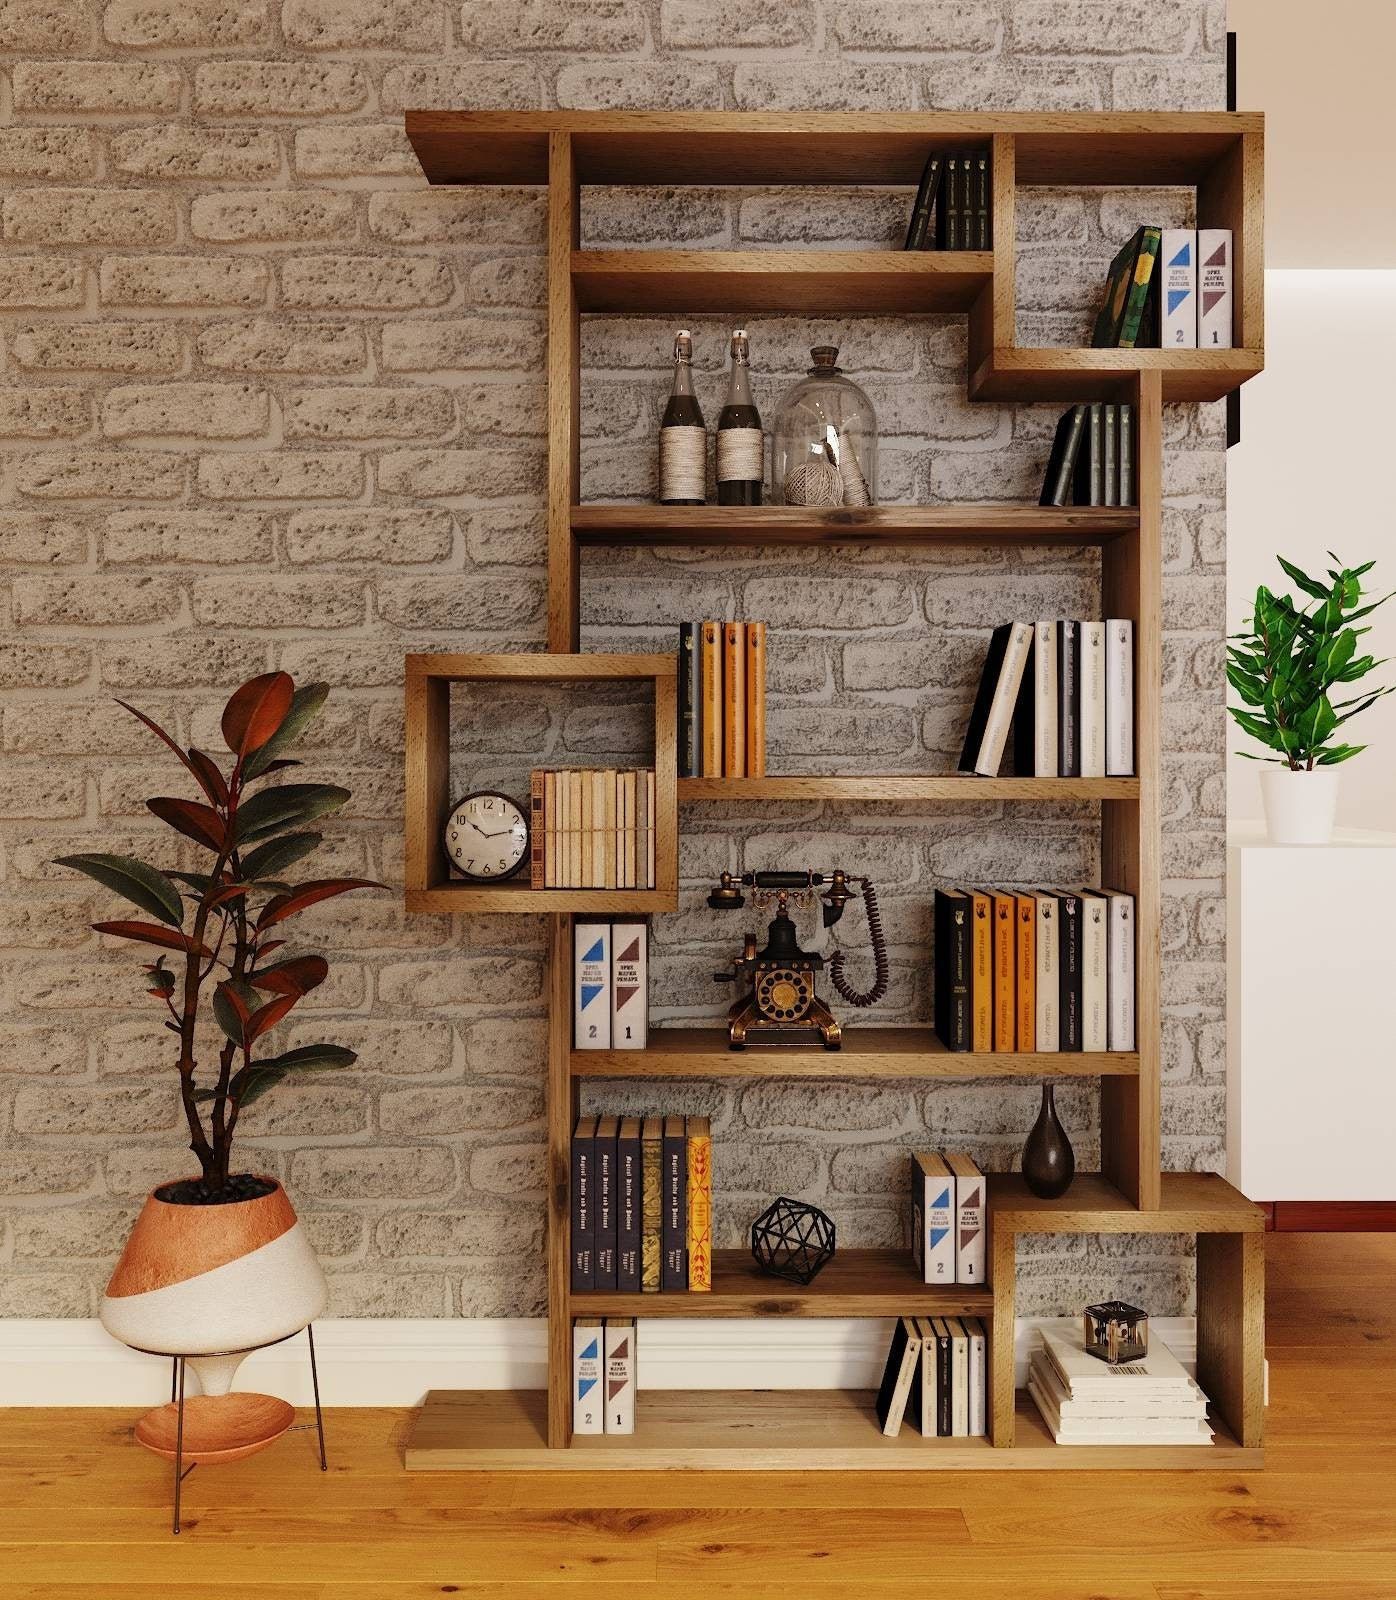 Shelving Units Innovative Storage Solutions for Organizing Your Space